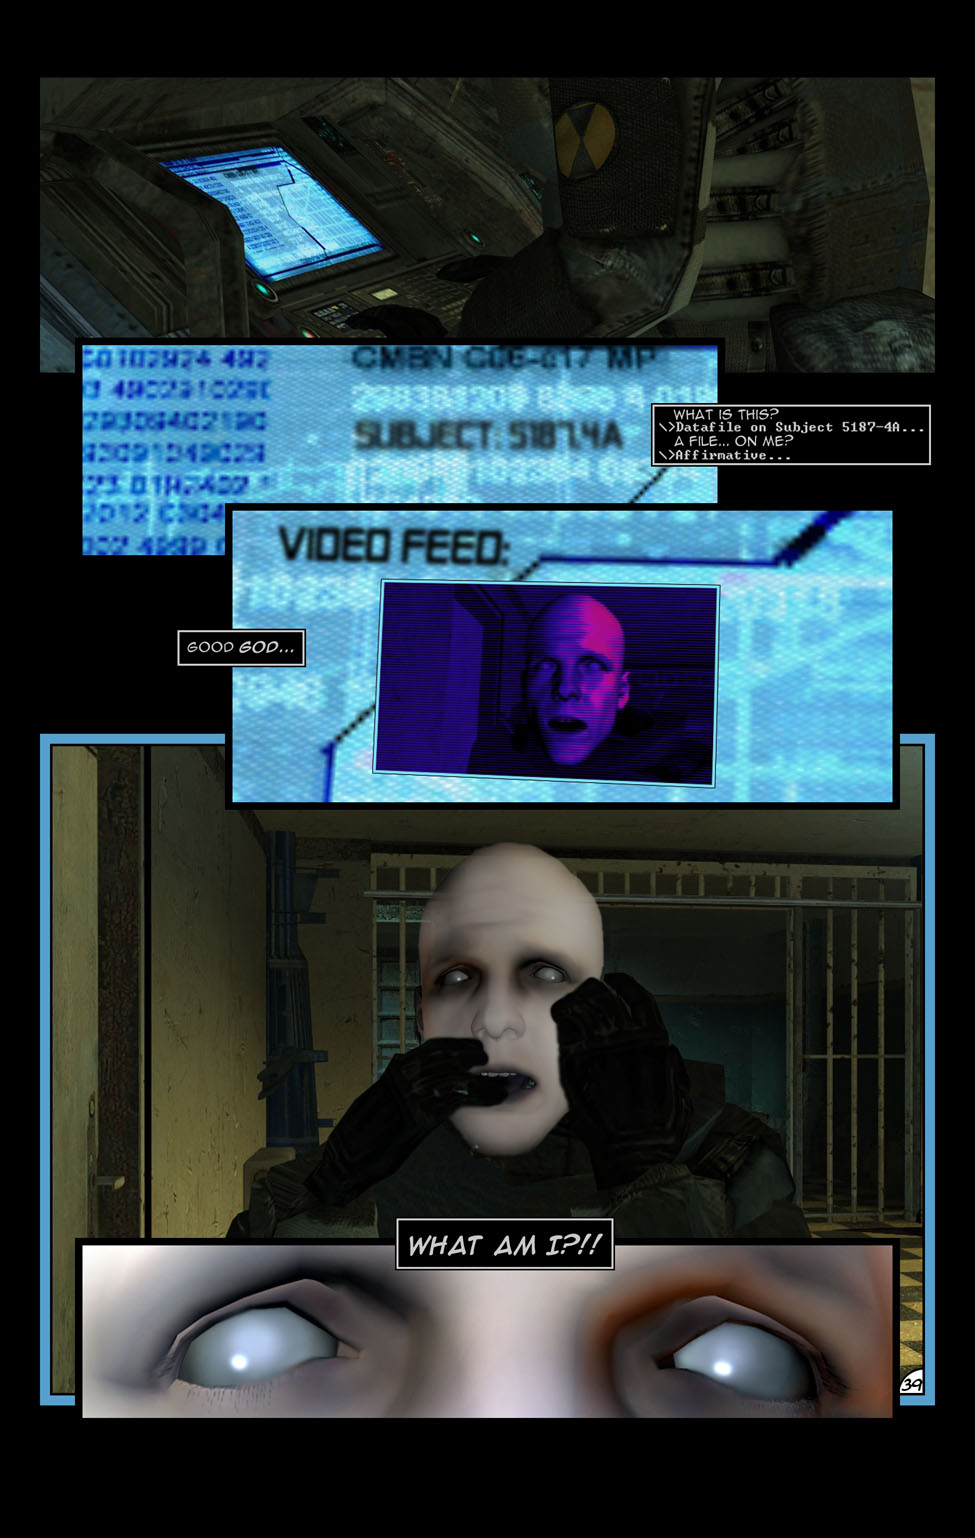 The soldier starts tapping at the Combine computer interface and finds their file. They open it and a live video feed pops up. The soldier looks back at their own face, bleached white, bald and mangled by Combine experiments. In horror, they ask themselves what they are.